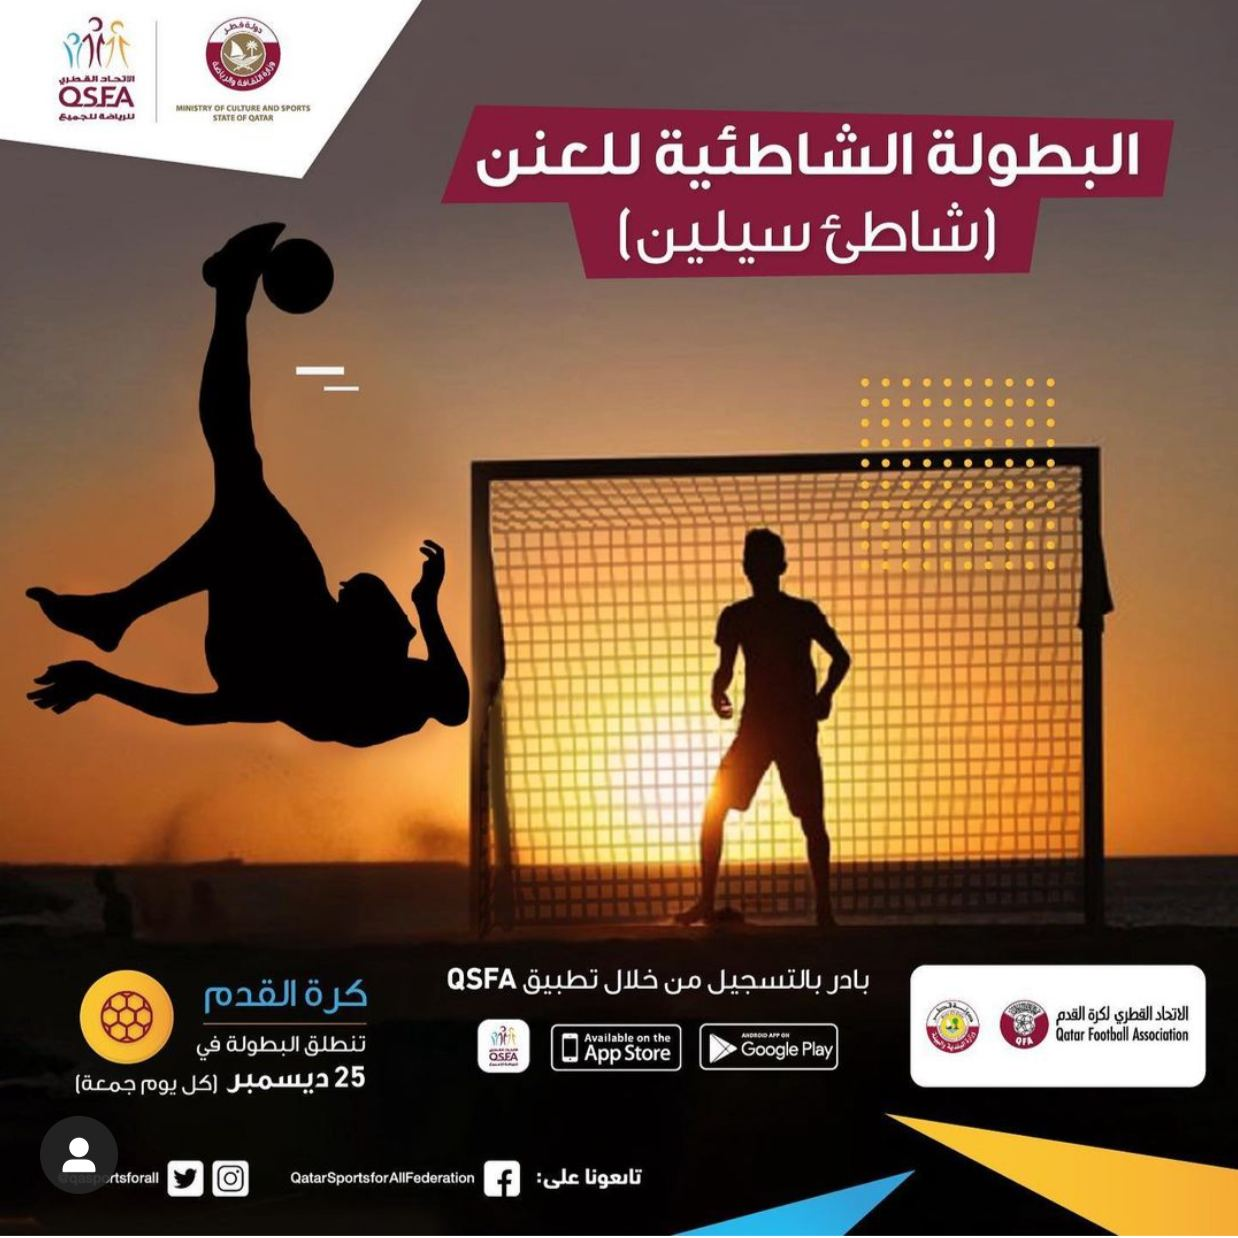 Doha Where & When .. Recreational and educational activities (Dec 24 - 27)